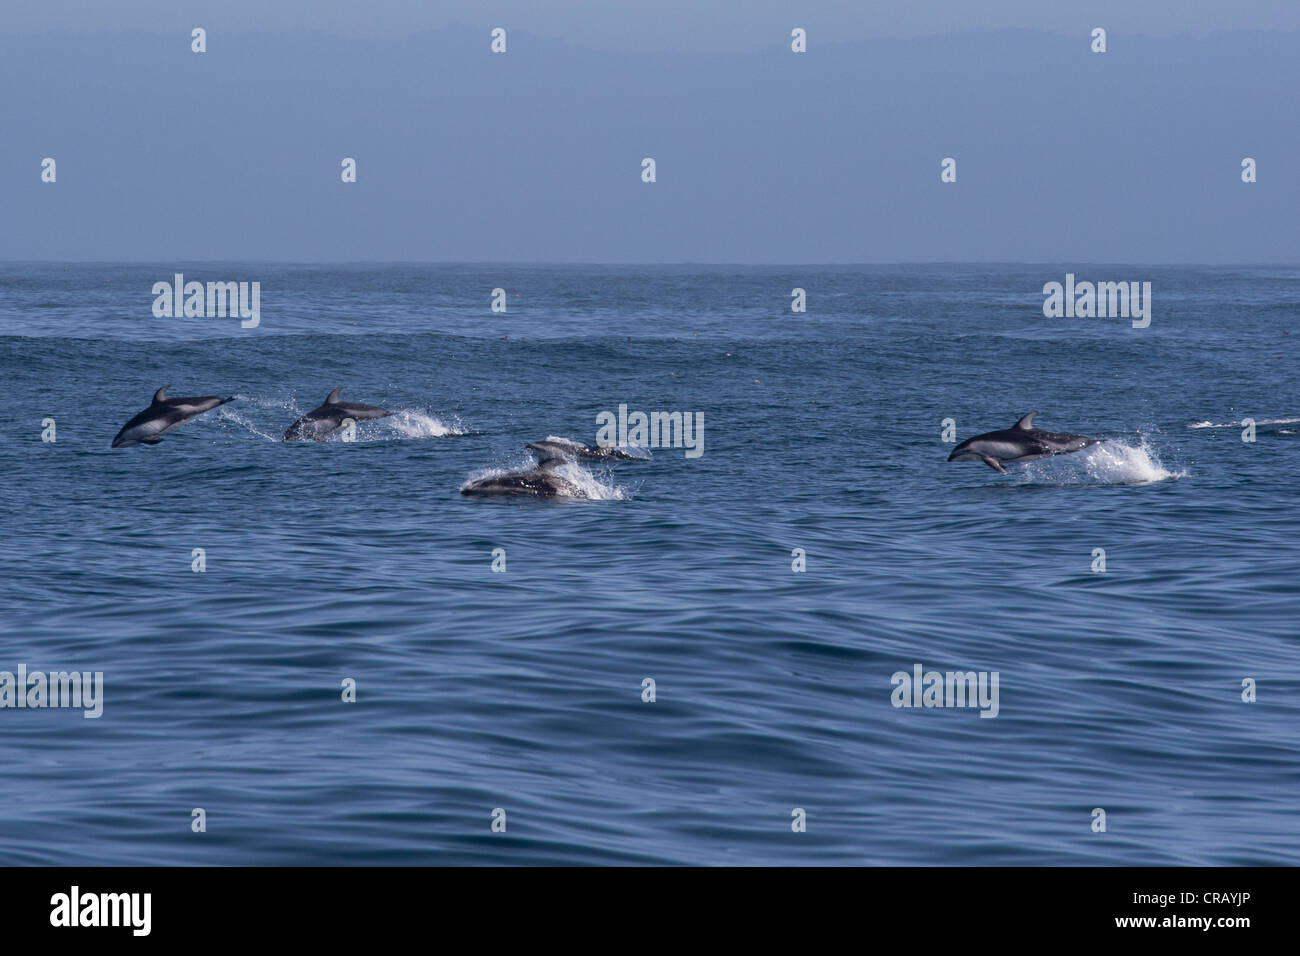 Pacific White-sided dolphin (Lagenorhynchus obliquidens), group porpoising. Monterey, California, Pacific Ocean. Stock Photo